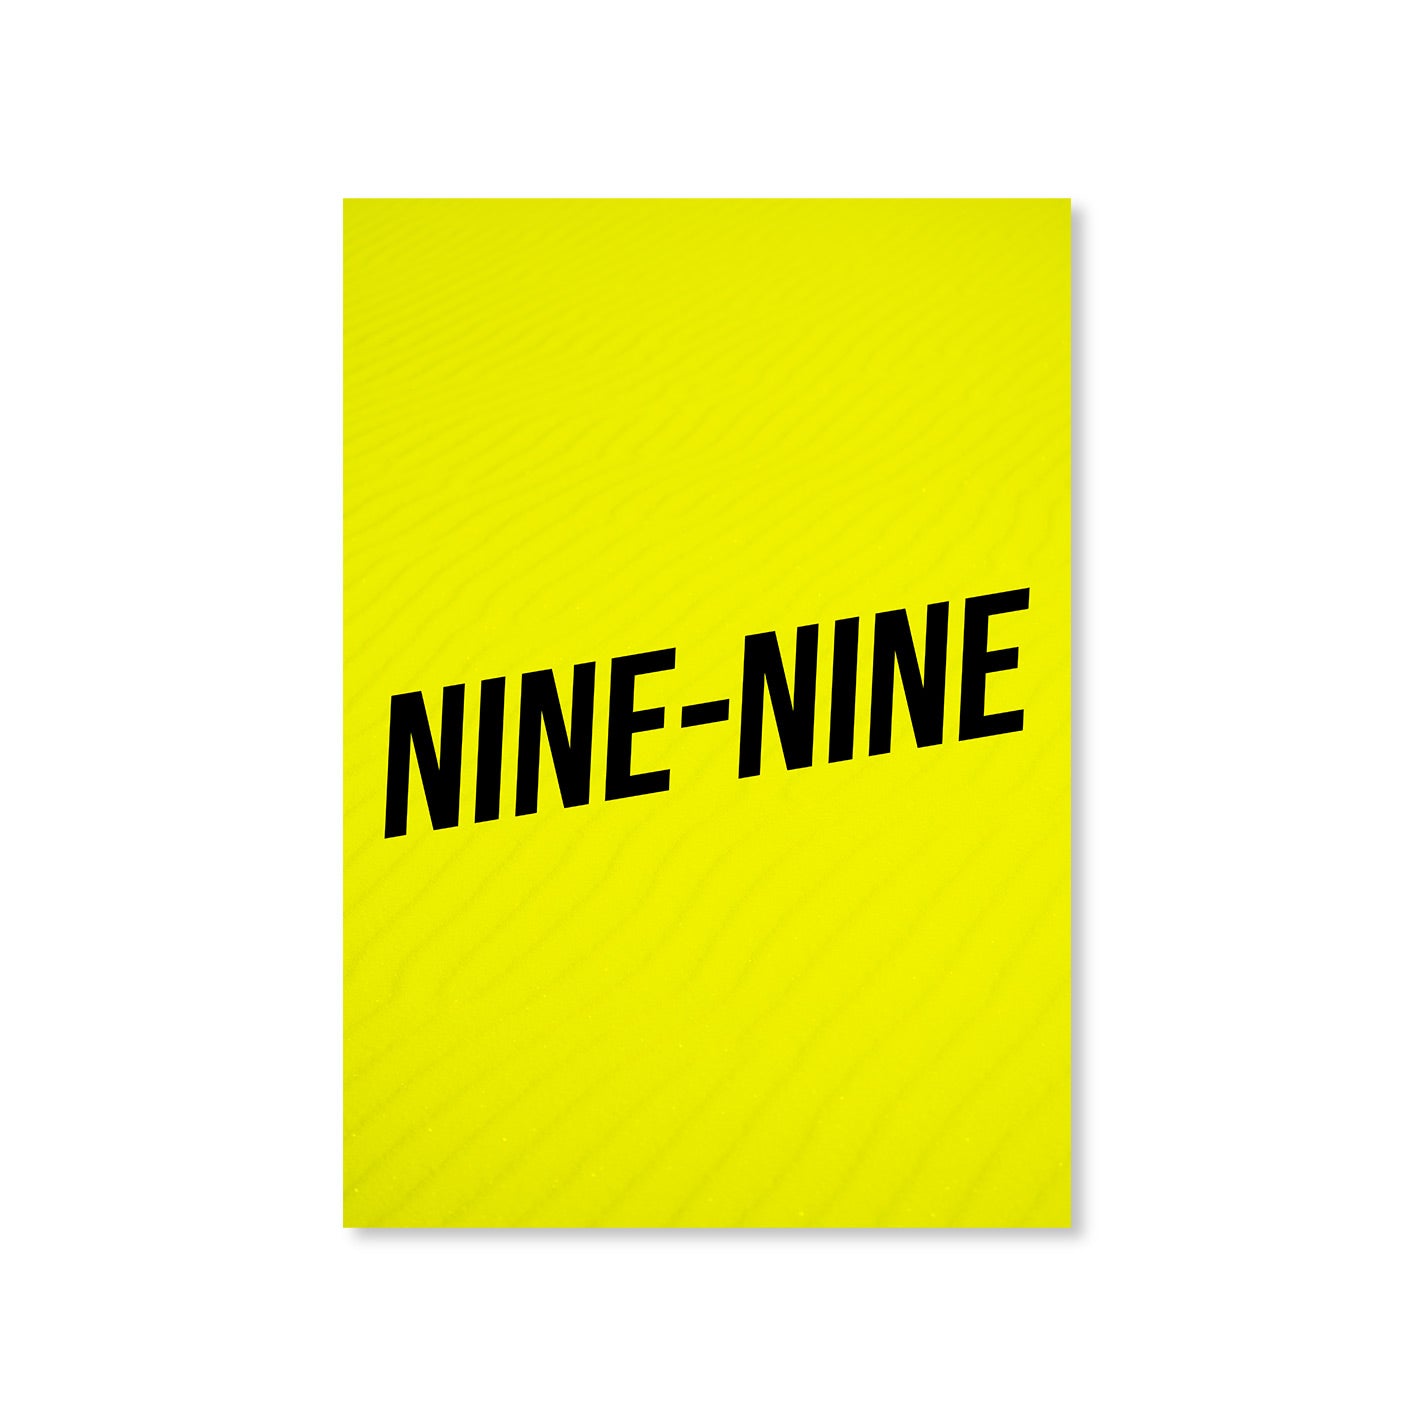 brooklyn nine-nine nine-nine poster wall art buy online united states of america usa the banyan tee tbt a4 detective jake peralta terry charles boyle gina linetti andy samberg merchandise clothing acceessories